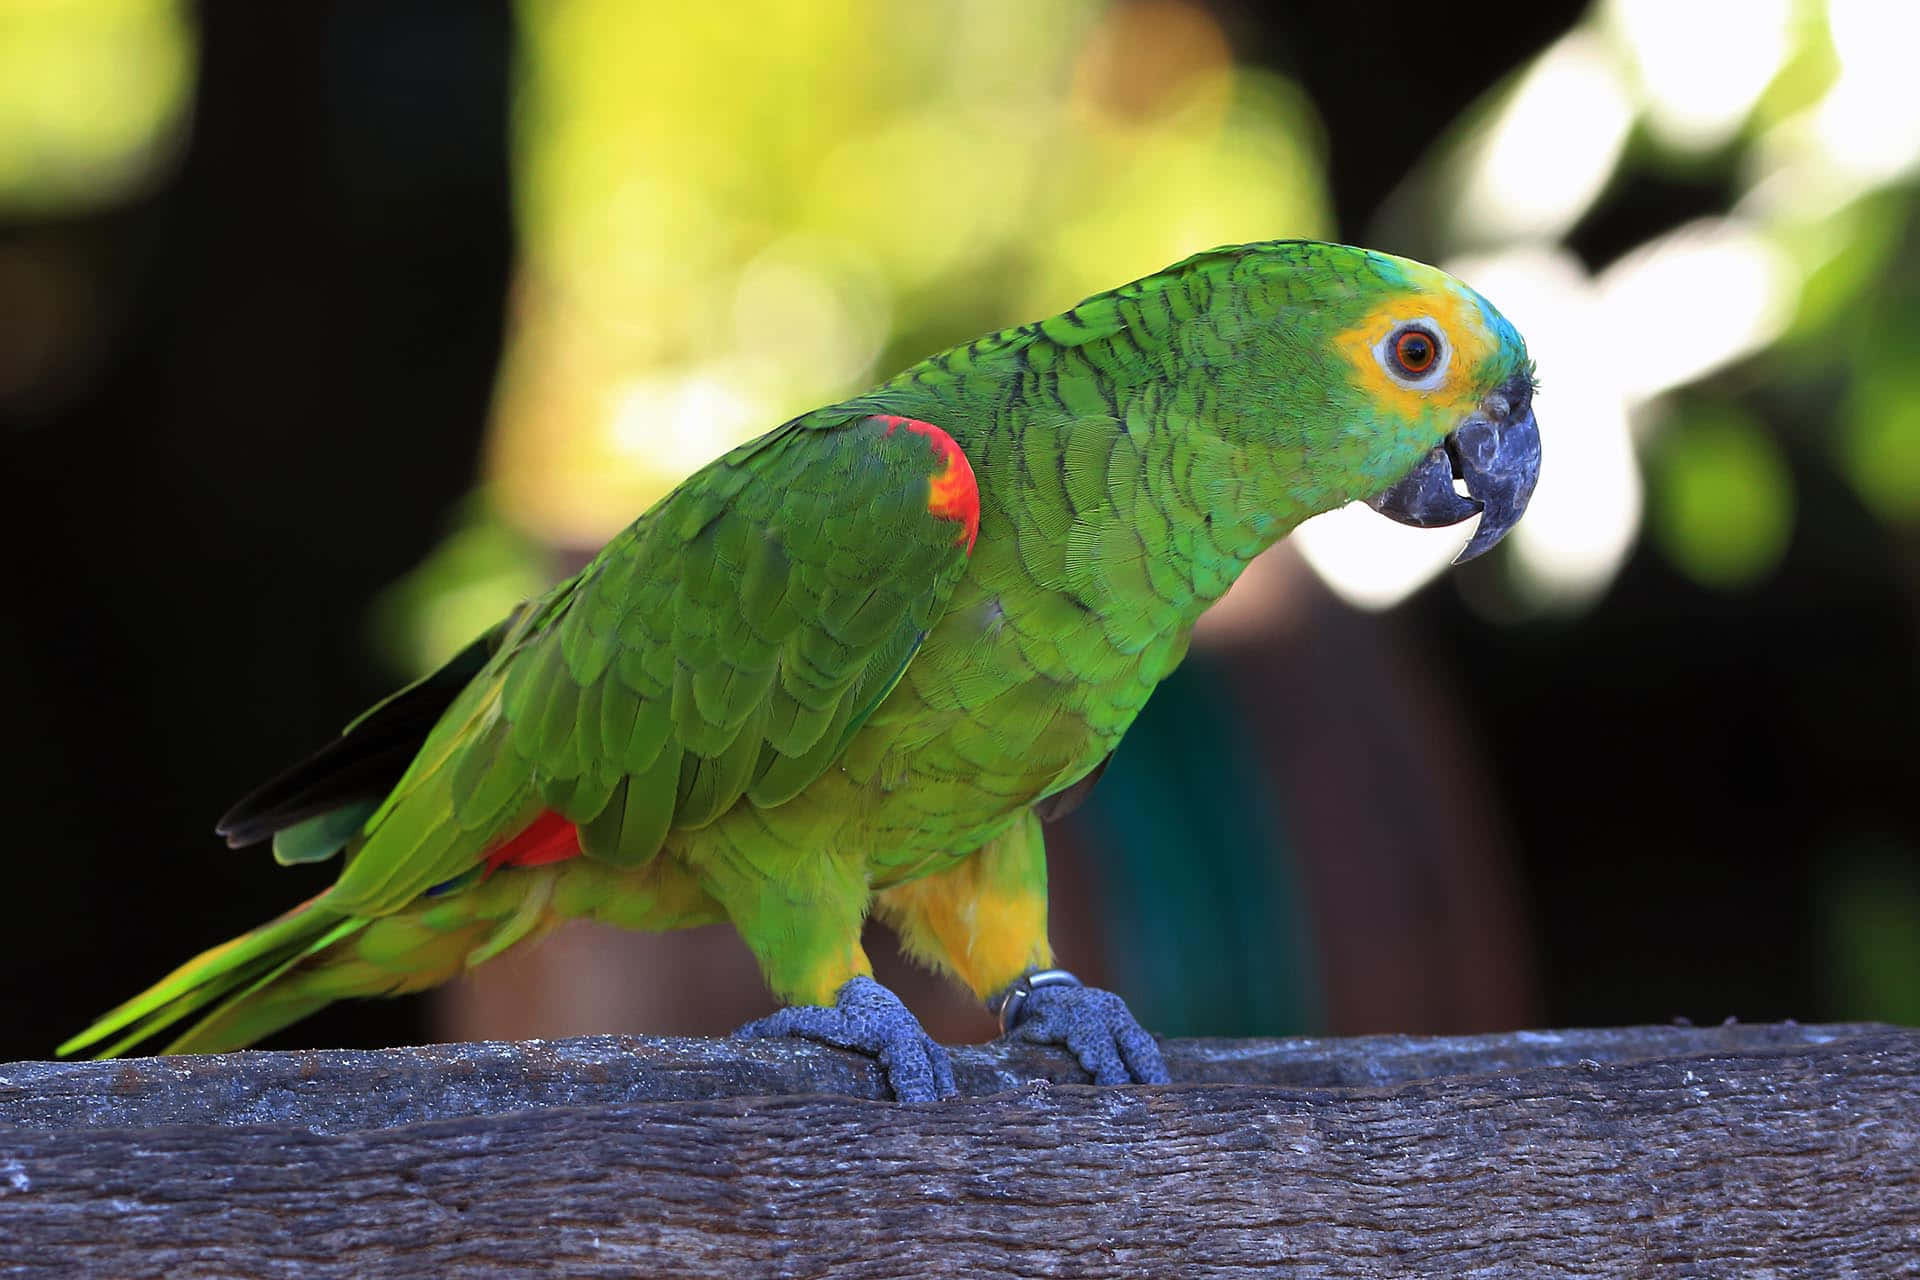 A Red and Blue Parrot Poses in a Tropical Setting